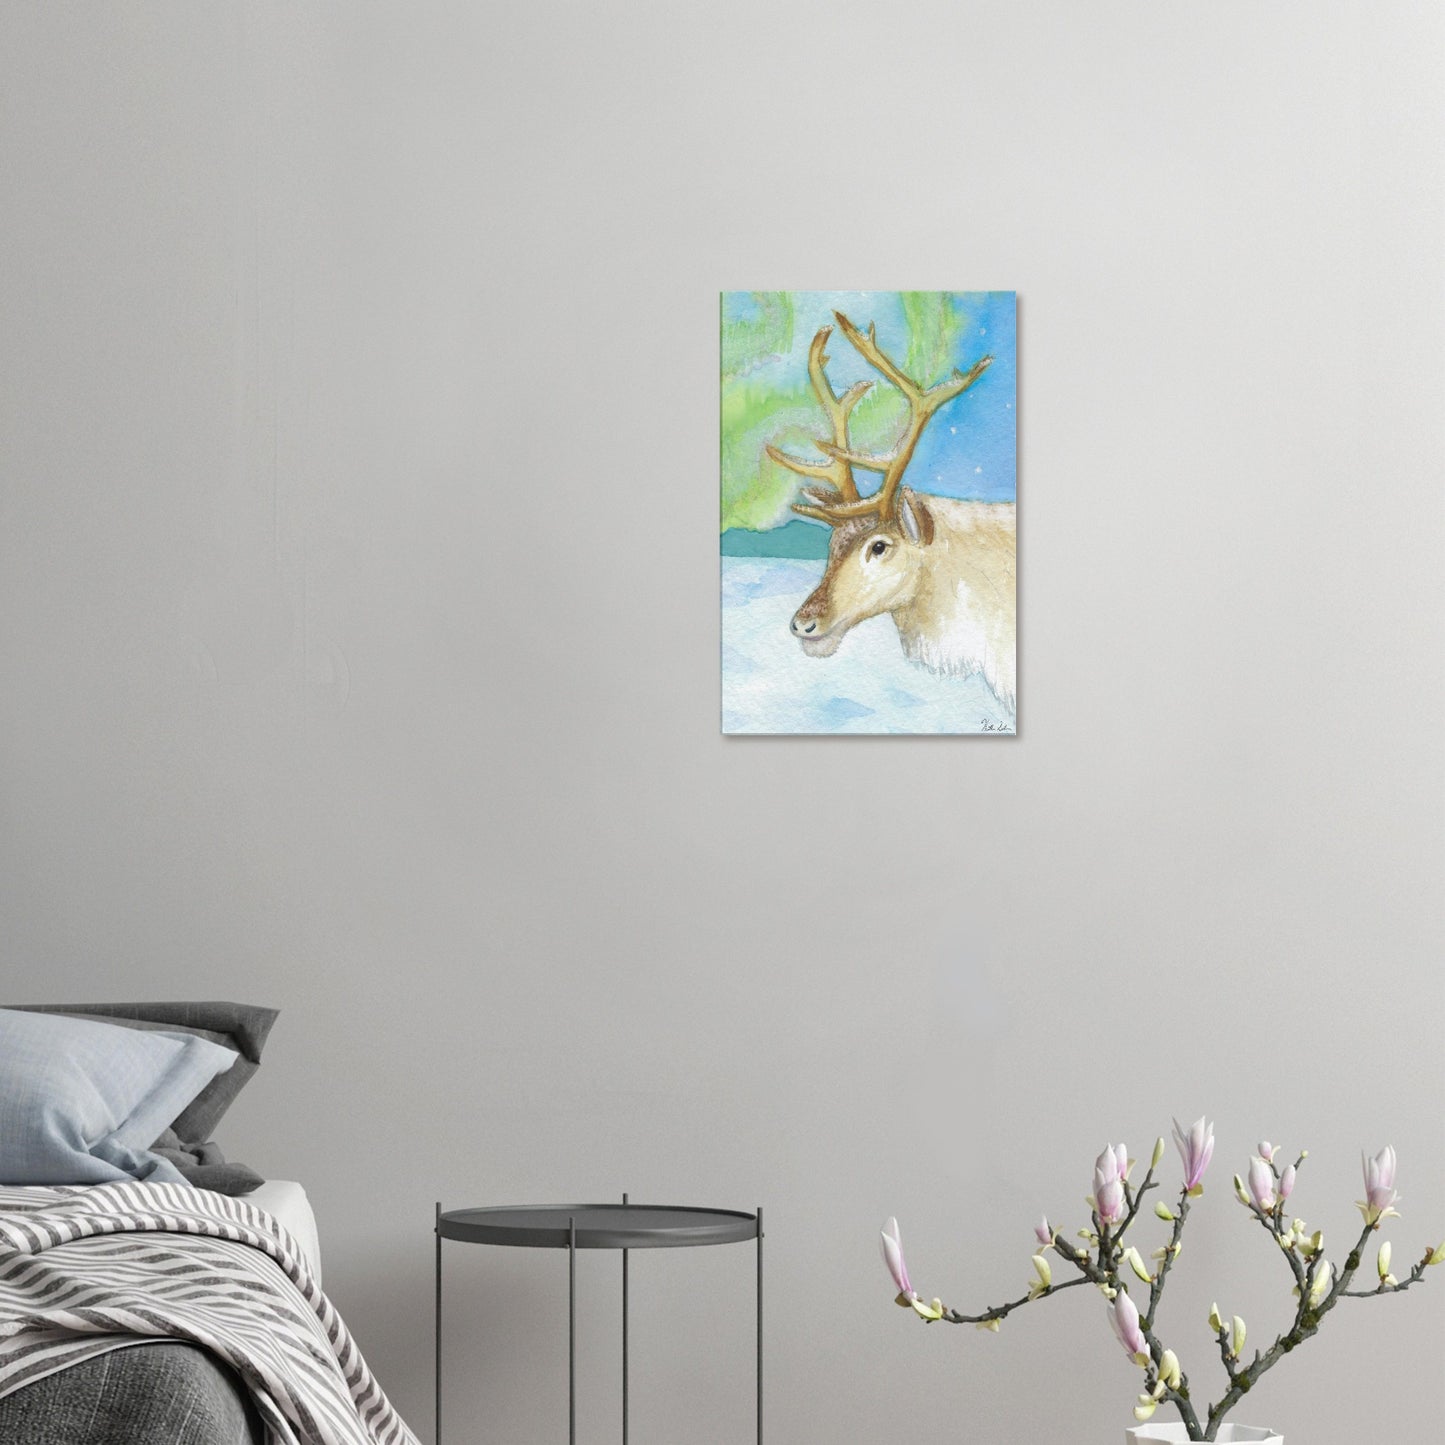 16 by 24 inch slim canvas print of Heather Silver's watercolor painting, northern lights reindeer. Shown on wall above grey bed, grey nightstand, and blooming branch décor.